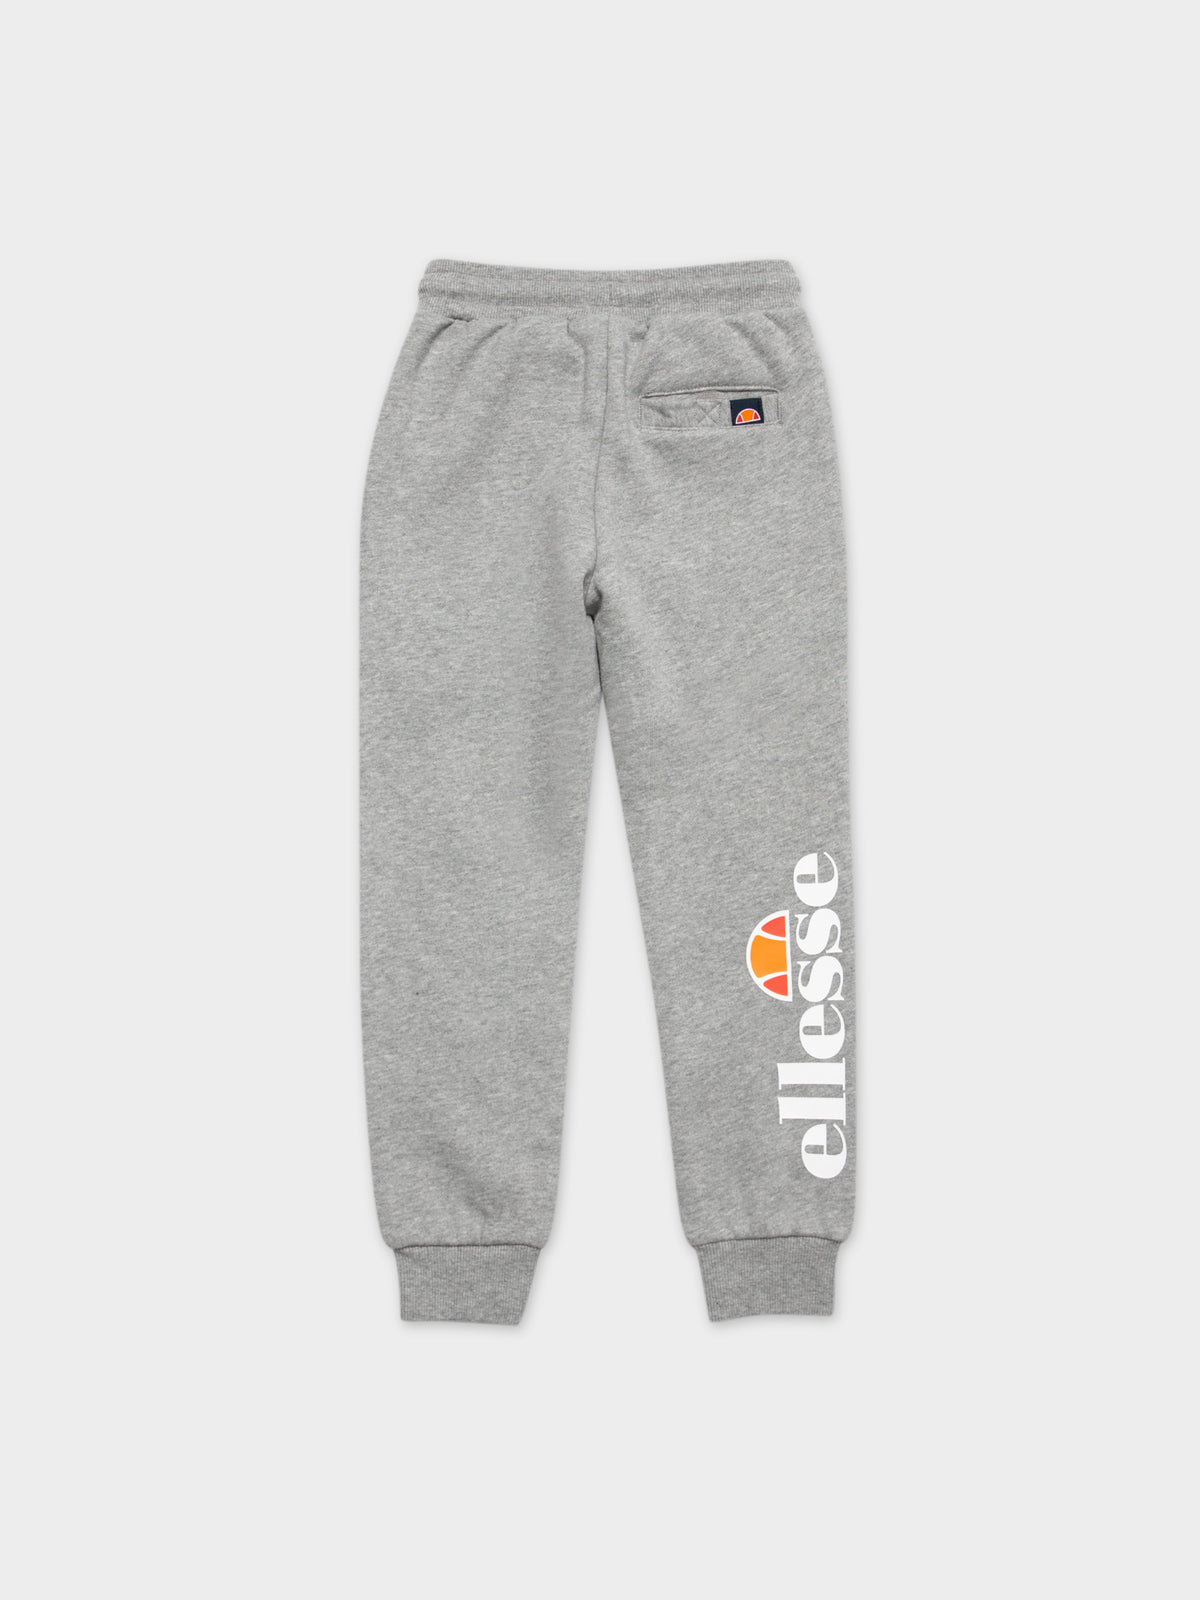 Infants Colino Track Pants in Grey Marle